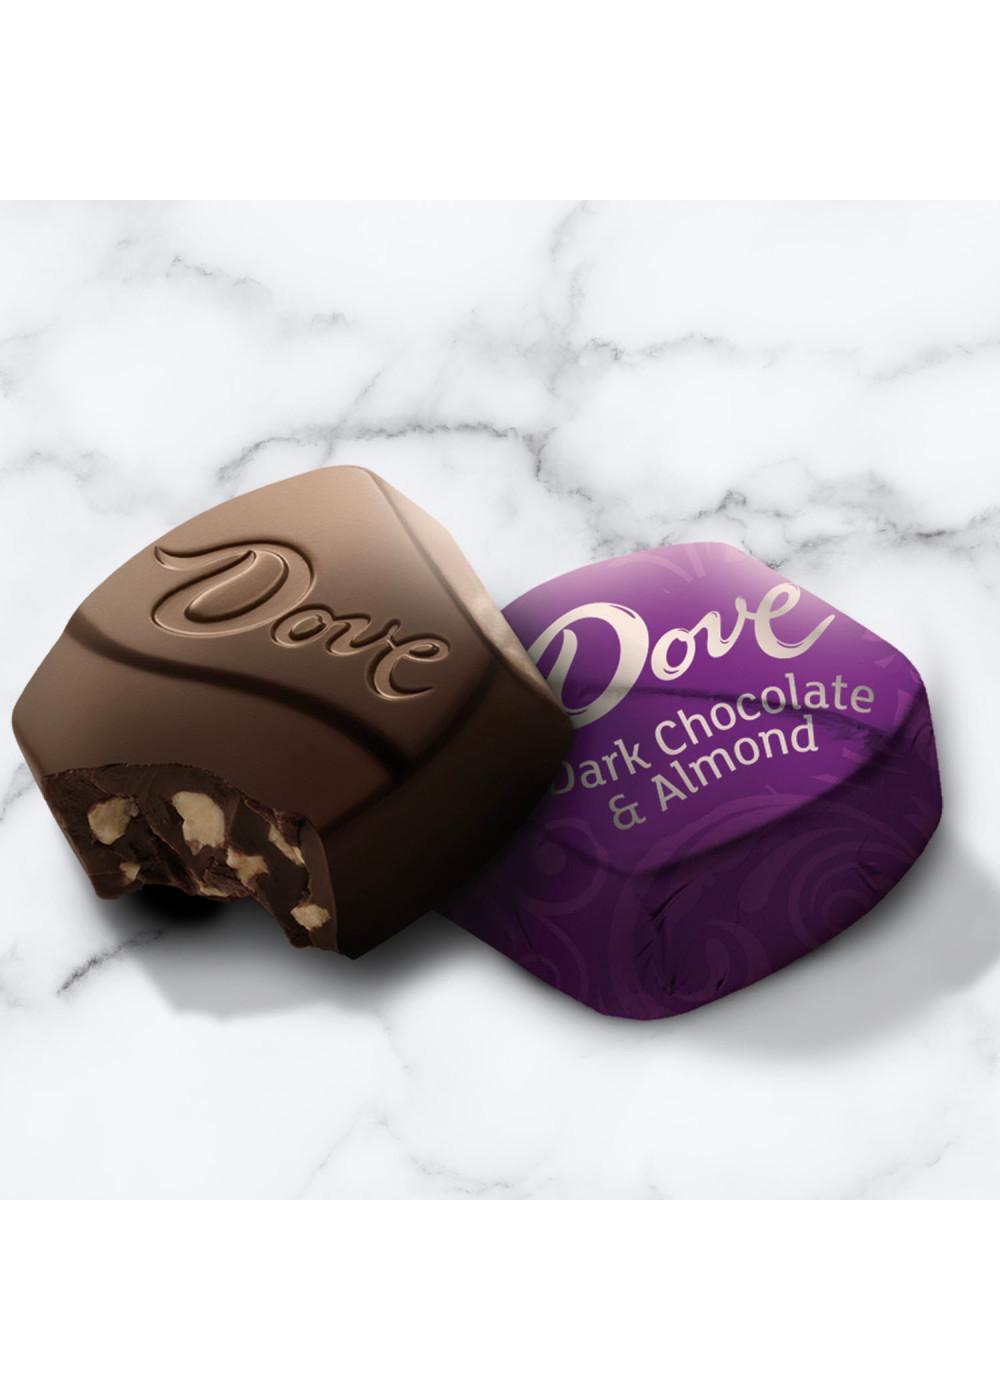 Dove Promises Milk Chocolate Candy - Shop Candy at H-E-B